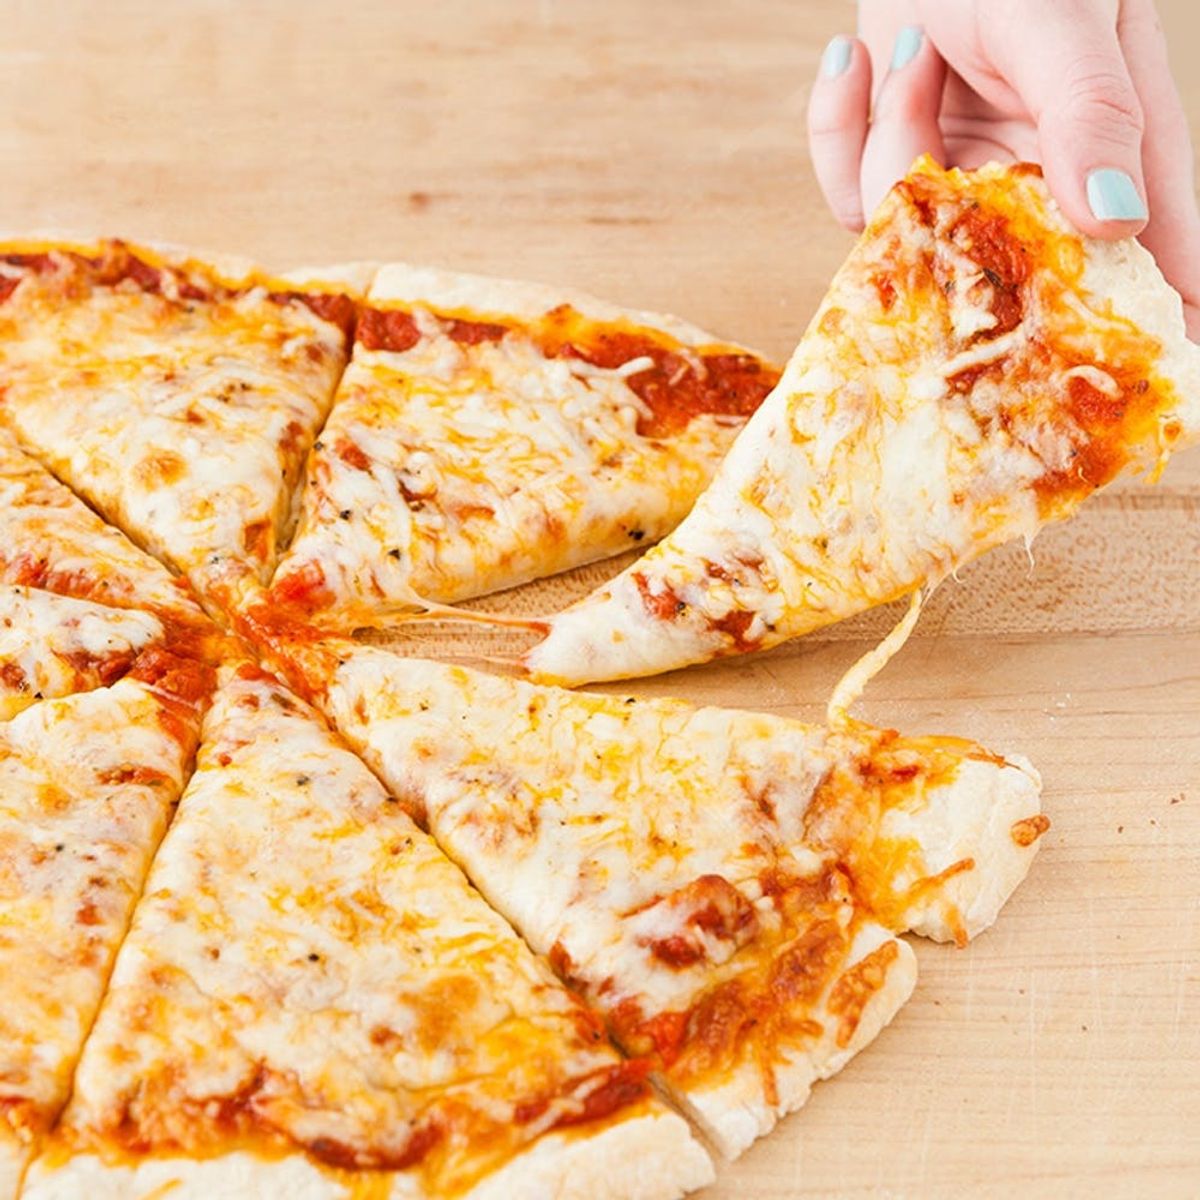 We Tried This Crazy 2 Ingredient Pizza Hack… and It Totally Worked!